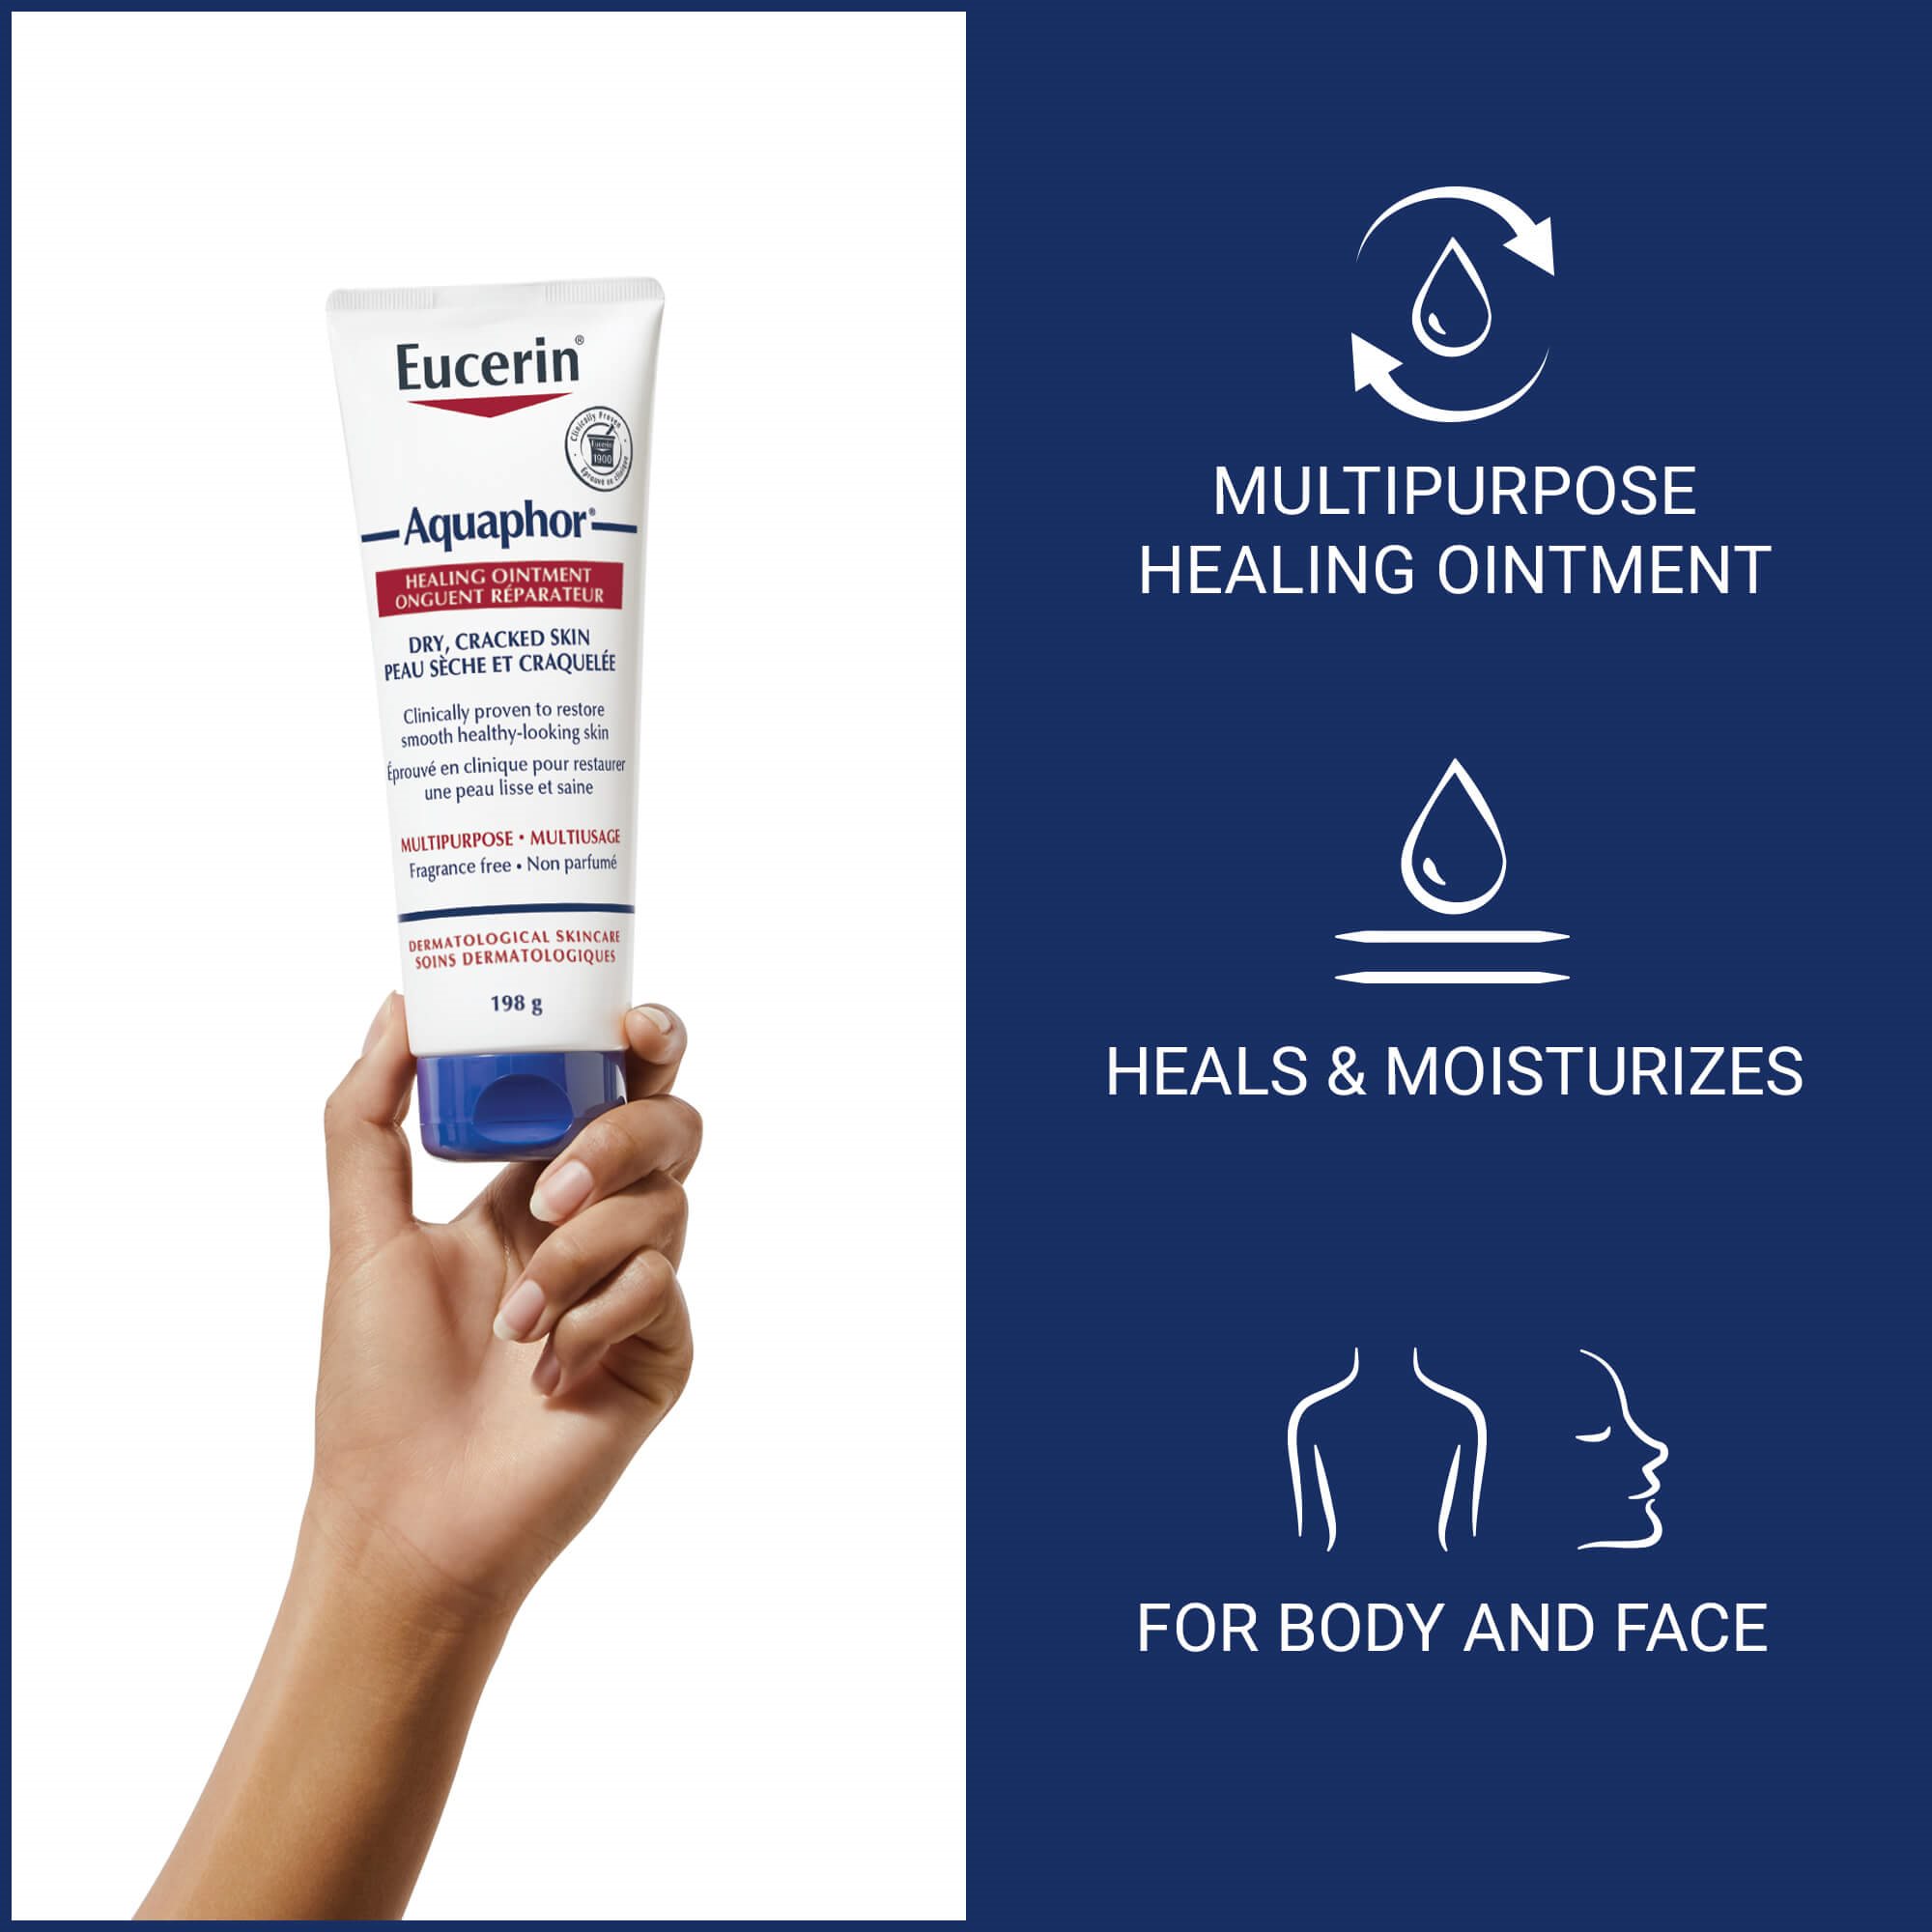 Close up of an Eucerin Aquaphor 198g tube being held up by a hand with product benefits and uses listed on the side